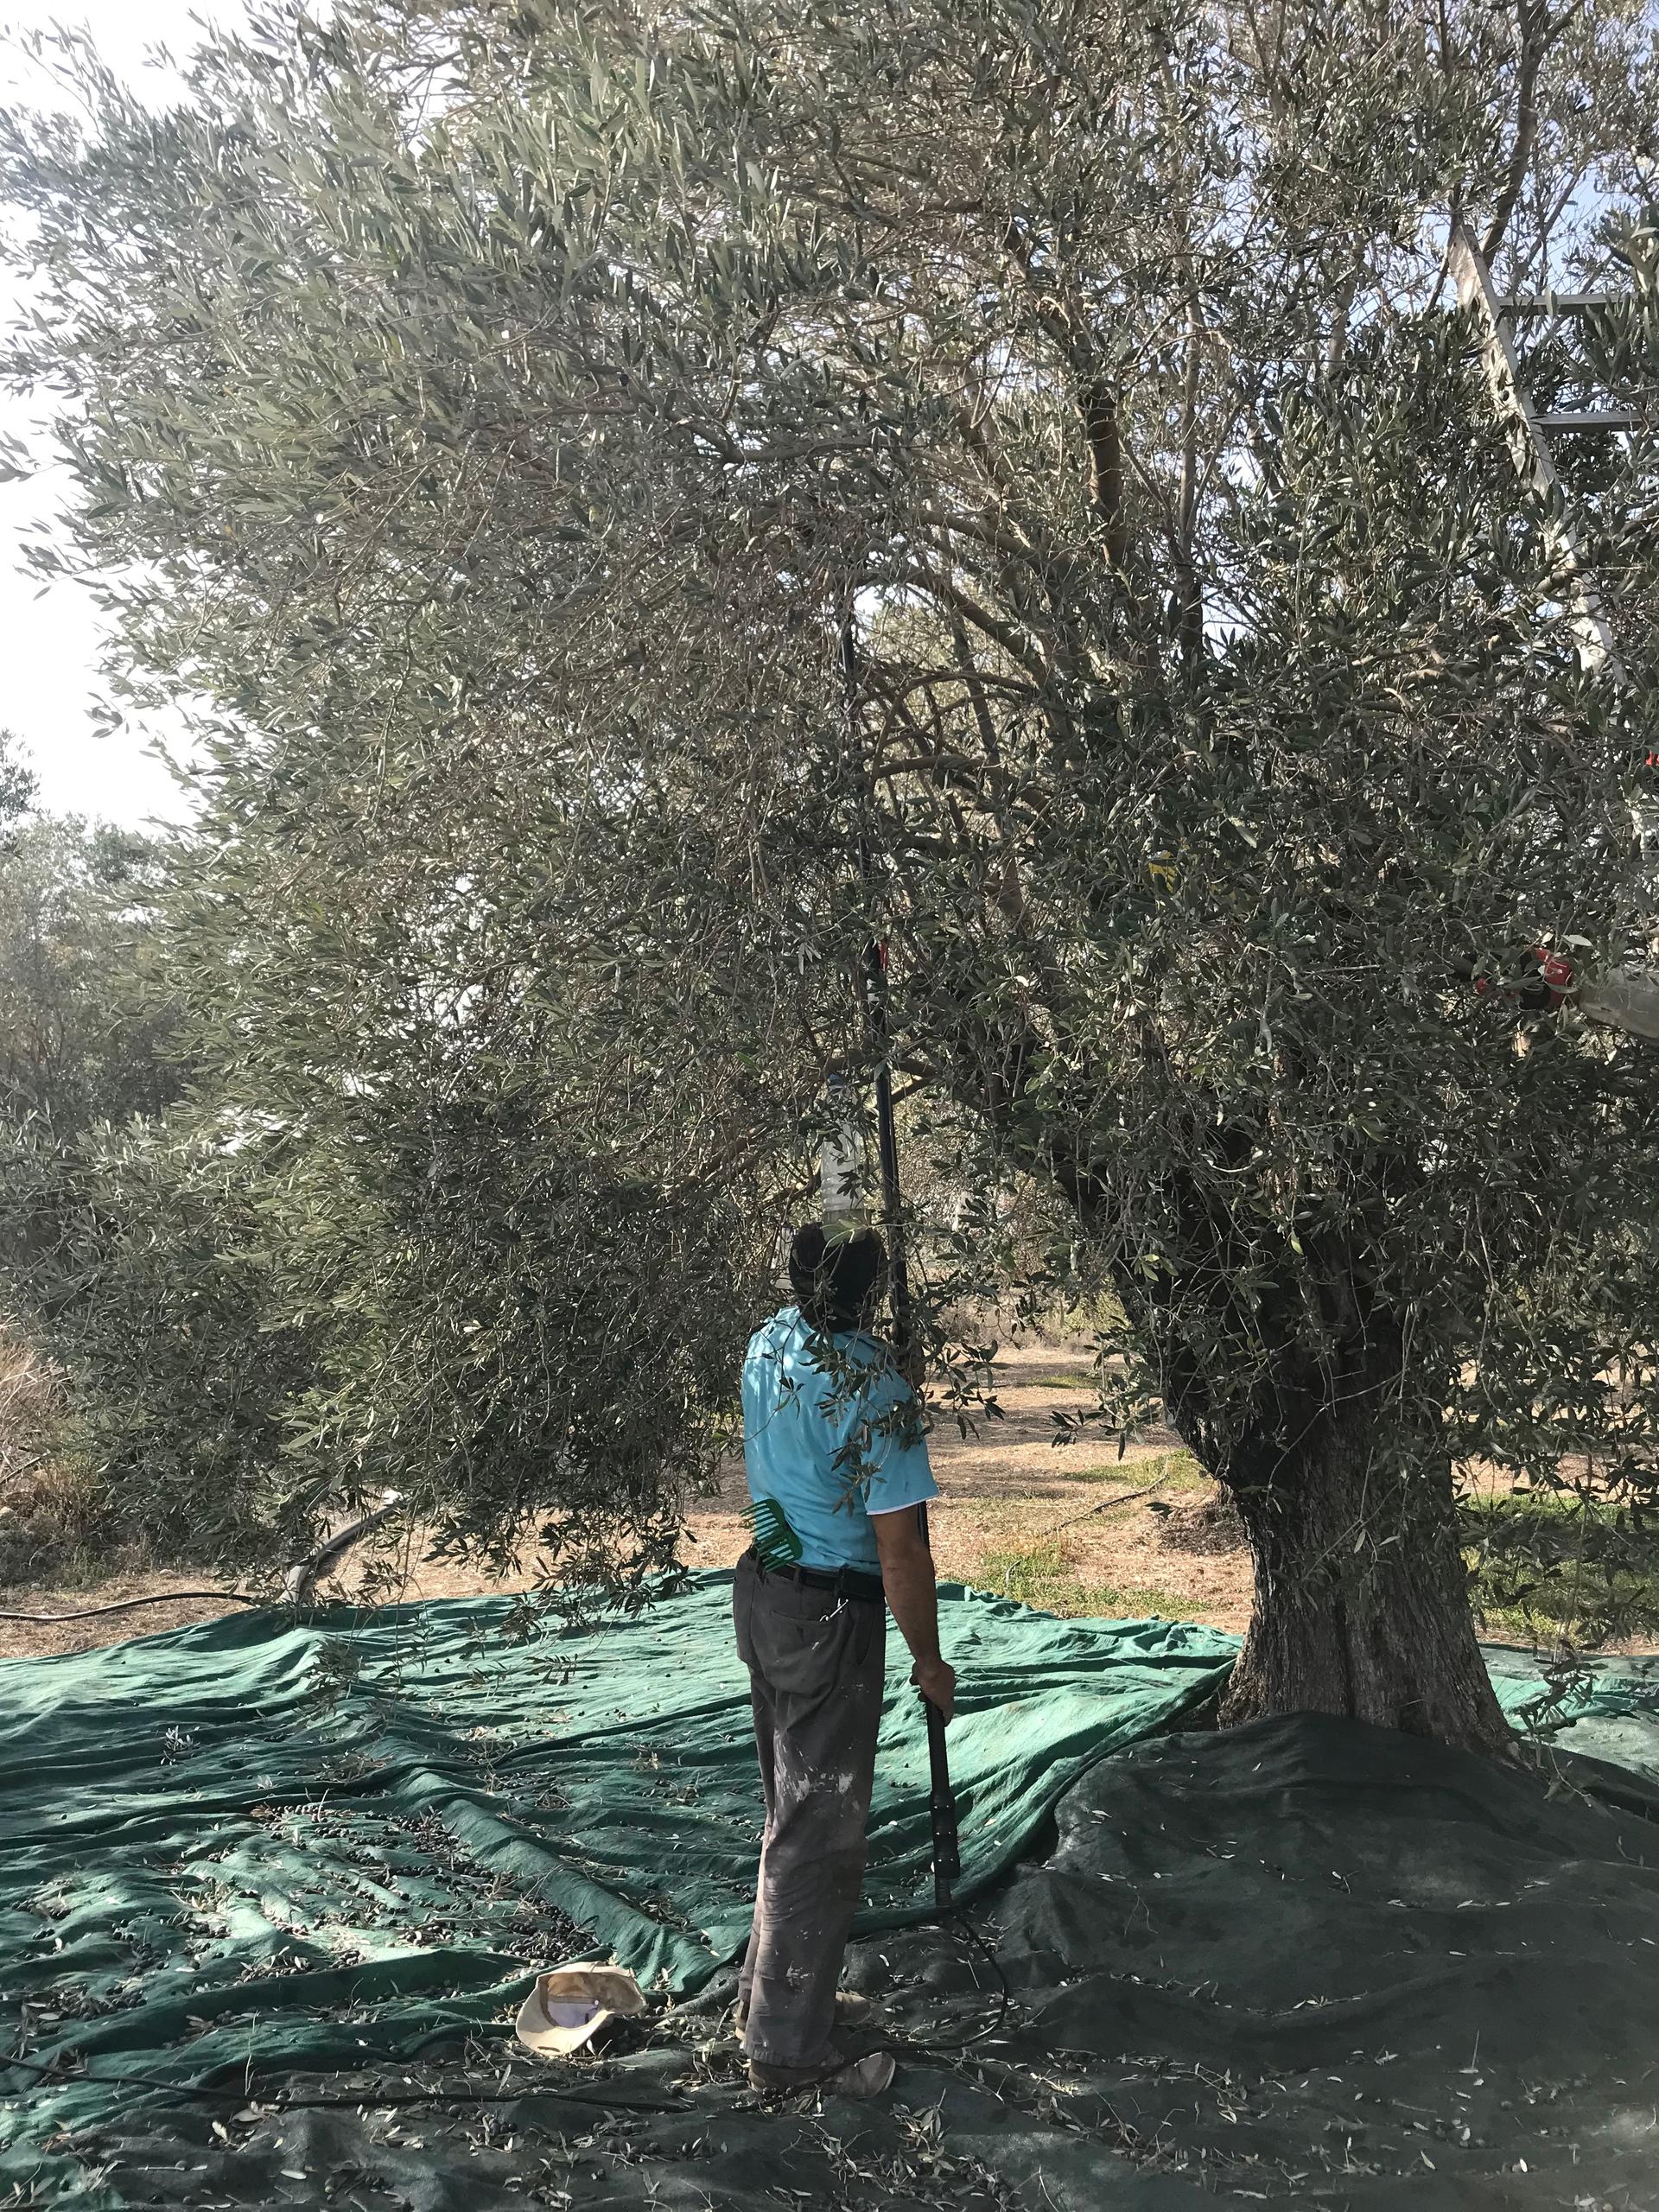 A man picks olives from a tree.